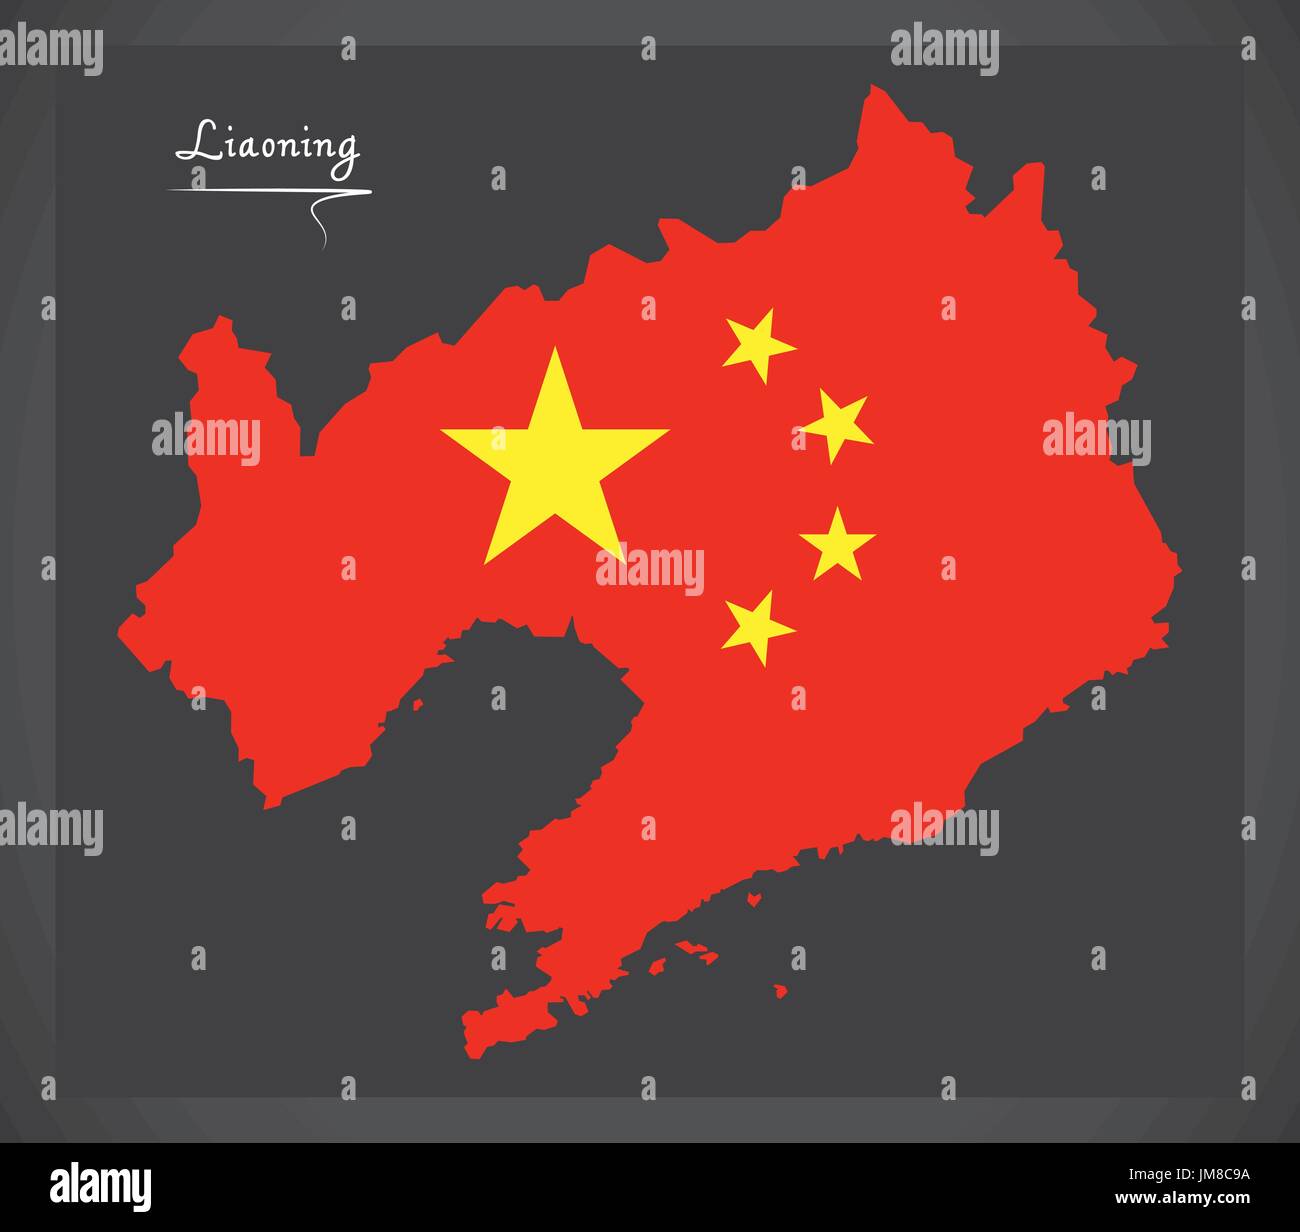 Liaoning China map with Chinese national flag illustration Stock Vector